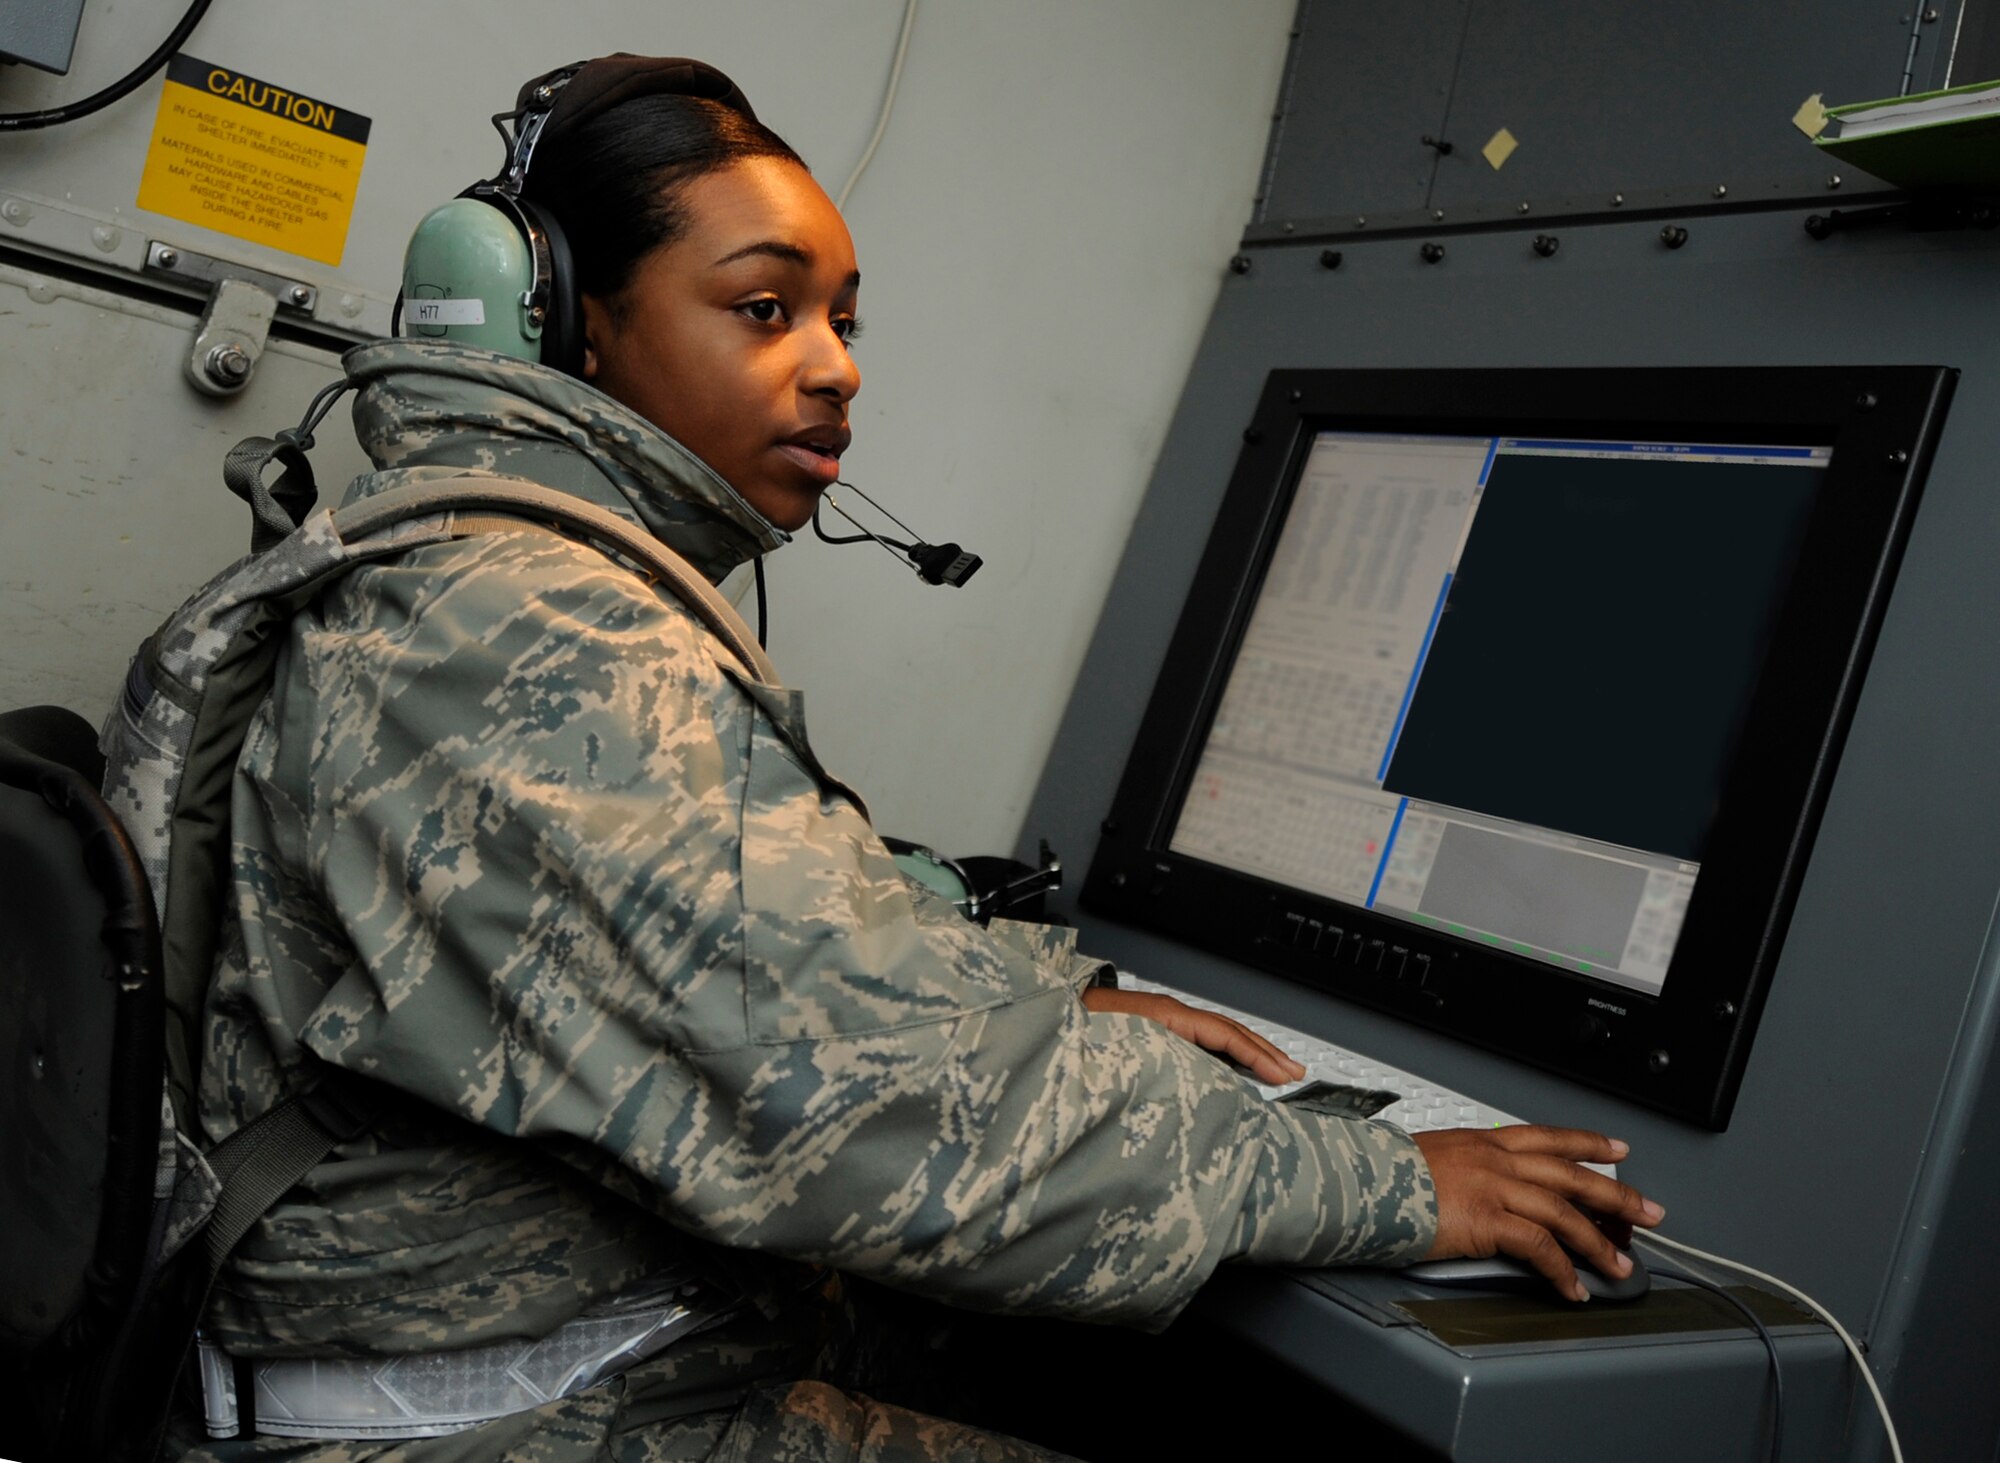 CAMP RILEA, OREGON -- Airman 1st Class Jasmine Gordon, 726th Air Control Squadron surveillance technician, helps control the air space during a mission performed in a weeklong exercise at Camp Rilea, Oregon, April 12. The 726th ACS tackles a wide-spread mission including enemy surveillance and identification, weapons control, joint and combined data-link connectivity, and battle management of offensive and defensive air activities. The squadron is made up of 27 different Air Force career fields, making it self-sustaining and able to deploy and fully operate without external support or help. (U.S. Air Force photo/Airman 1st Class Renishia Richardson)
